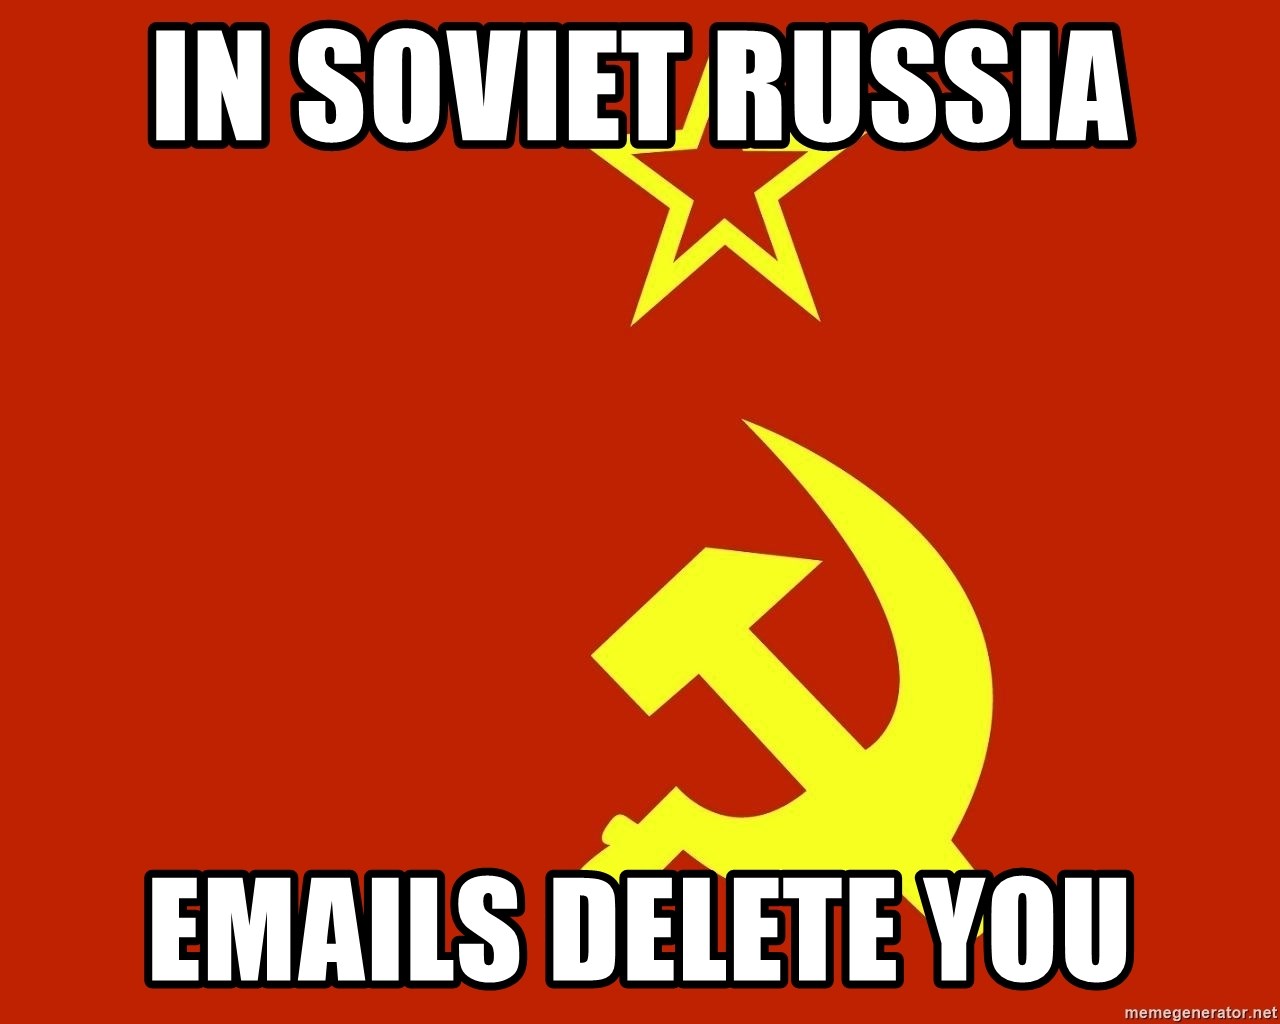 In Soviet Russia - in soviet russia  emails delete you